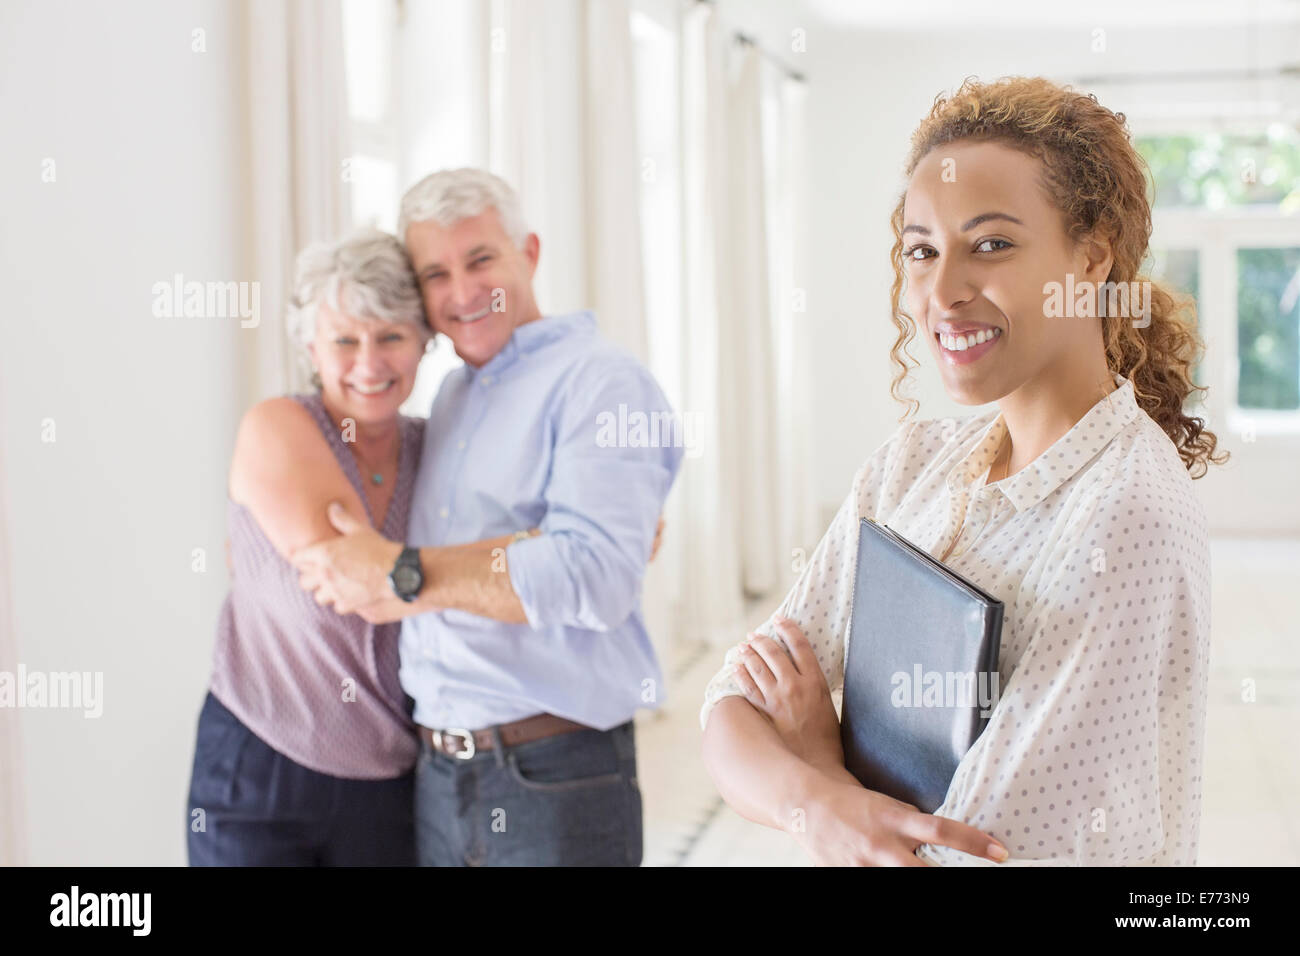 Older couple hugging with woman smiling Stock Photo